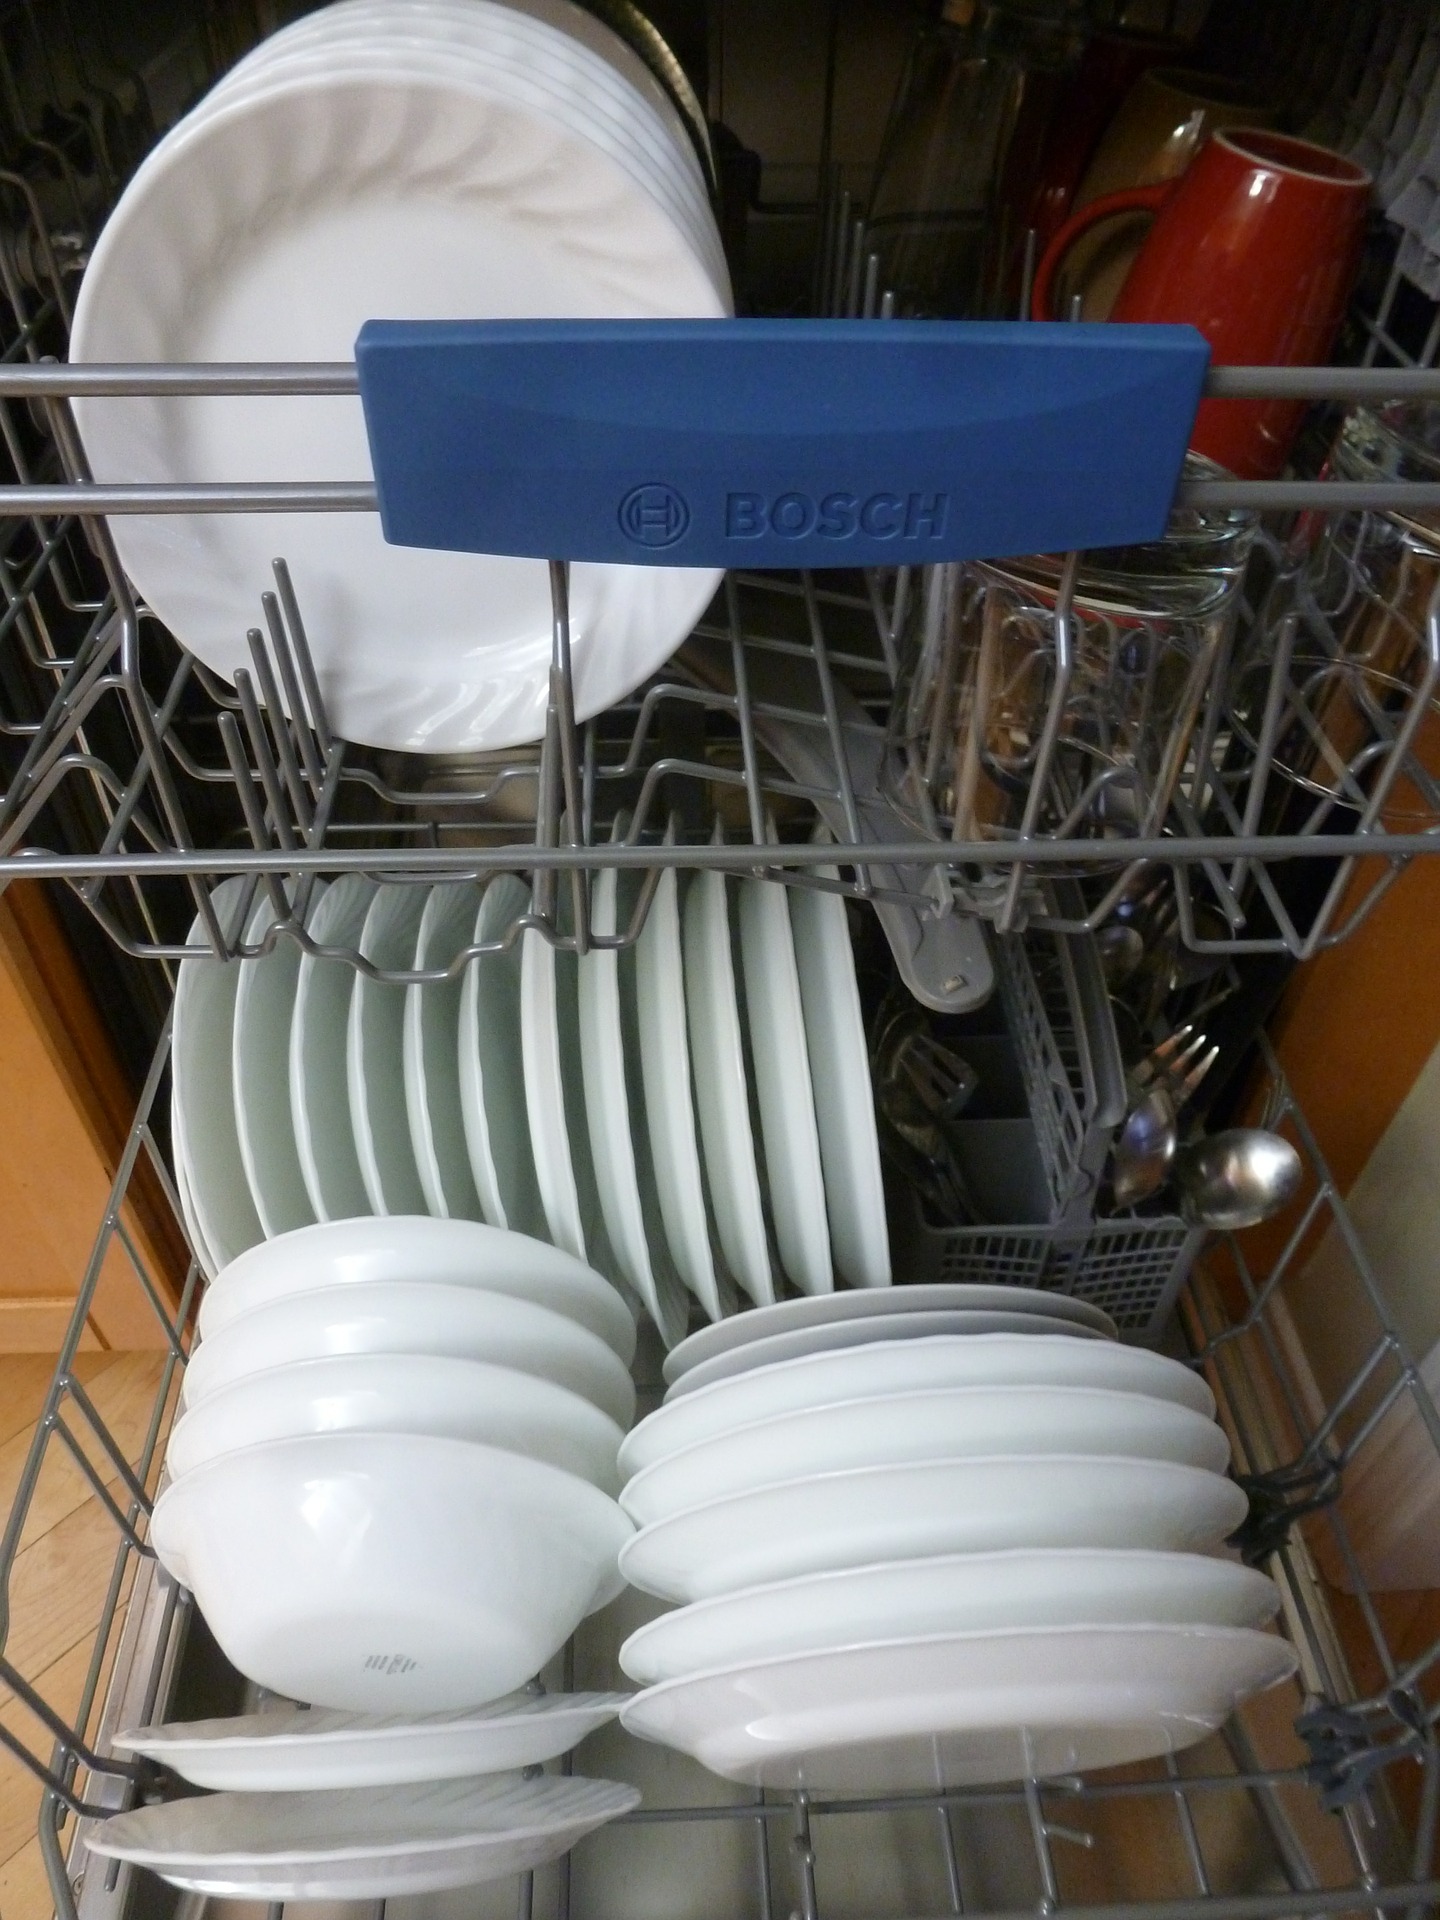 How To Adjust Your Dishwasher Rack 